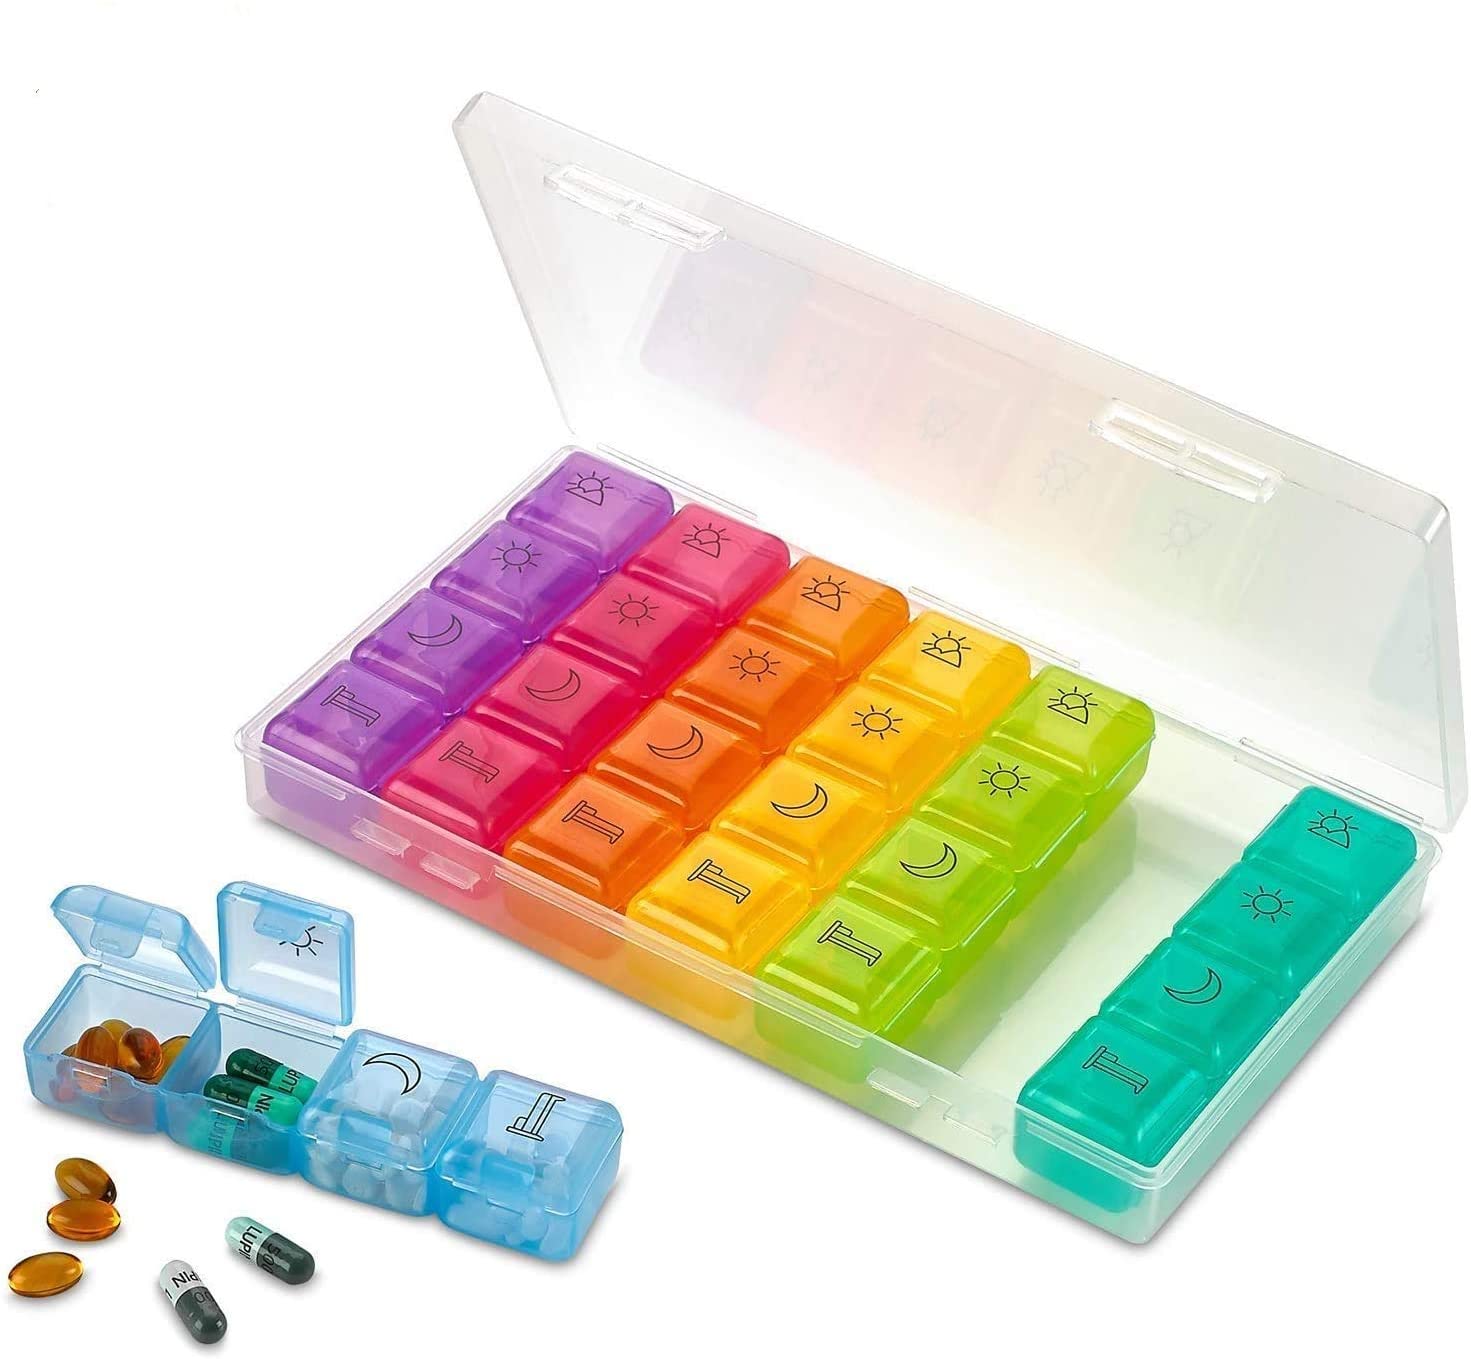 https://carismedic.com/wp-content/uploads/imported/Weekly-Pill-Organizer-4-Compartment-Ampm-Pill-Box-7-Day-Large-Travel-Medication-Dispenser-Case-for-Vitamins-and-Medi-B07BR8Z9ZT.jpg